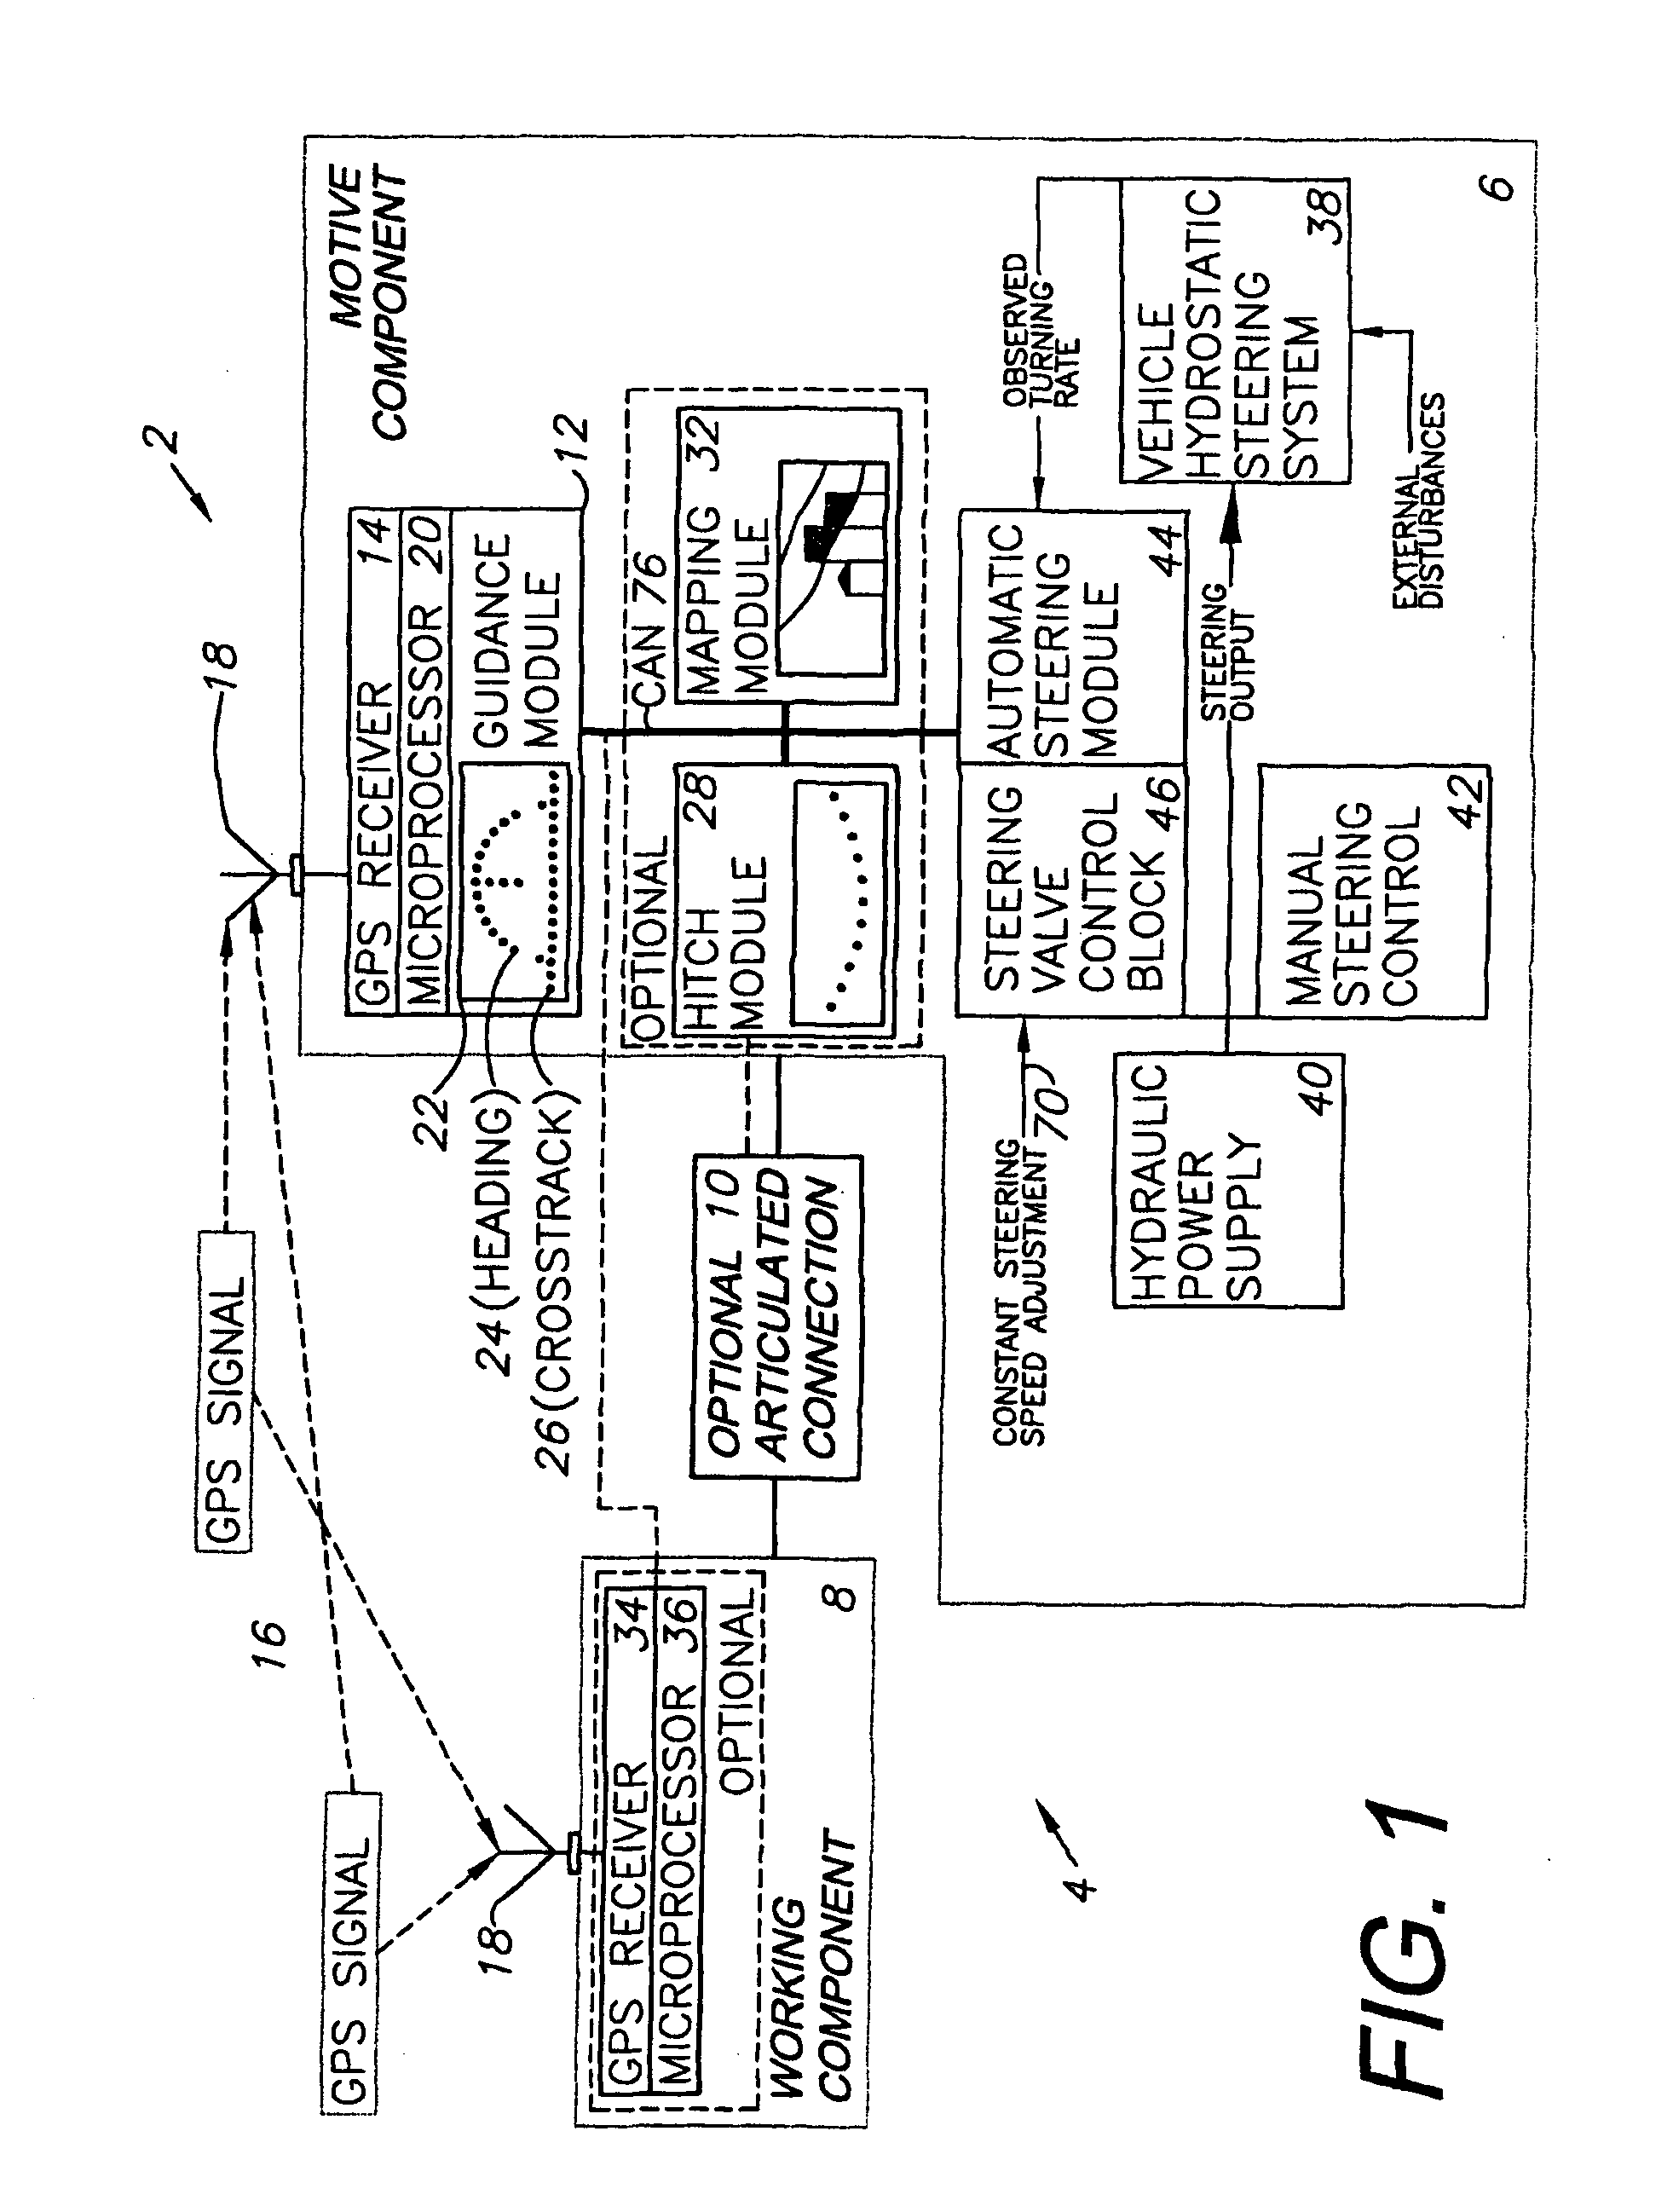 Automatic steering system and method